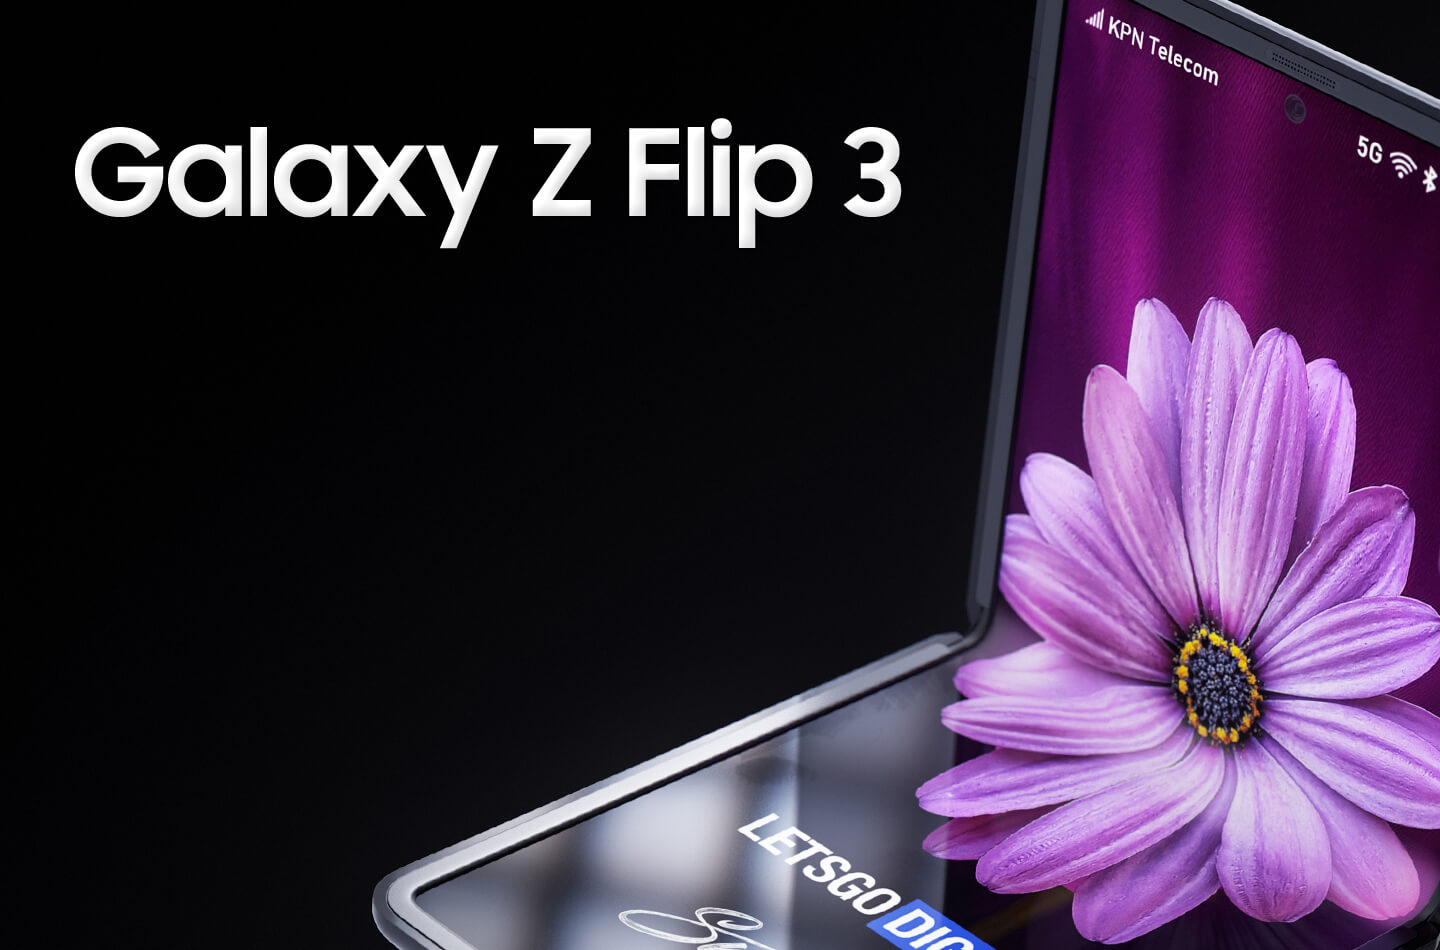 Samsung Galaxy Z Flip 3 Specifications, Price tipped